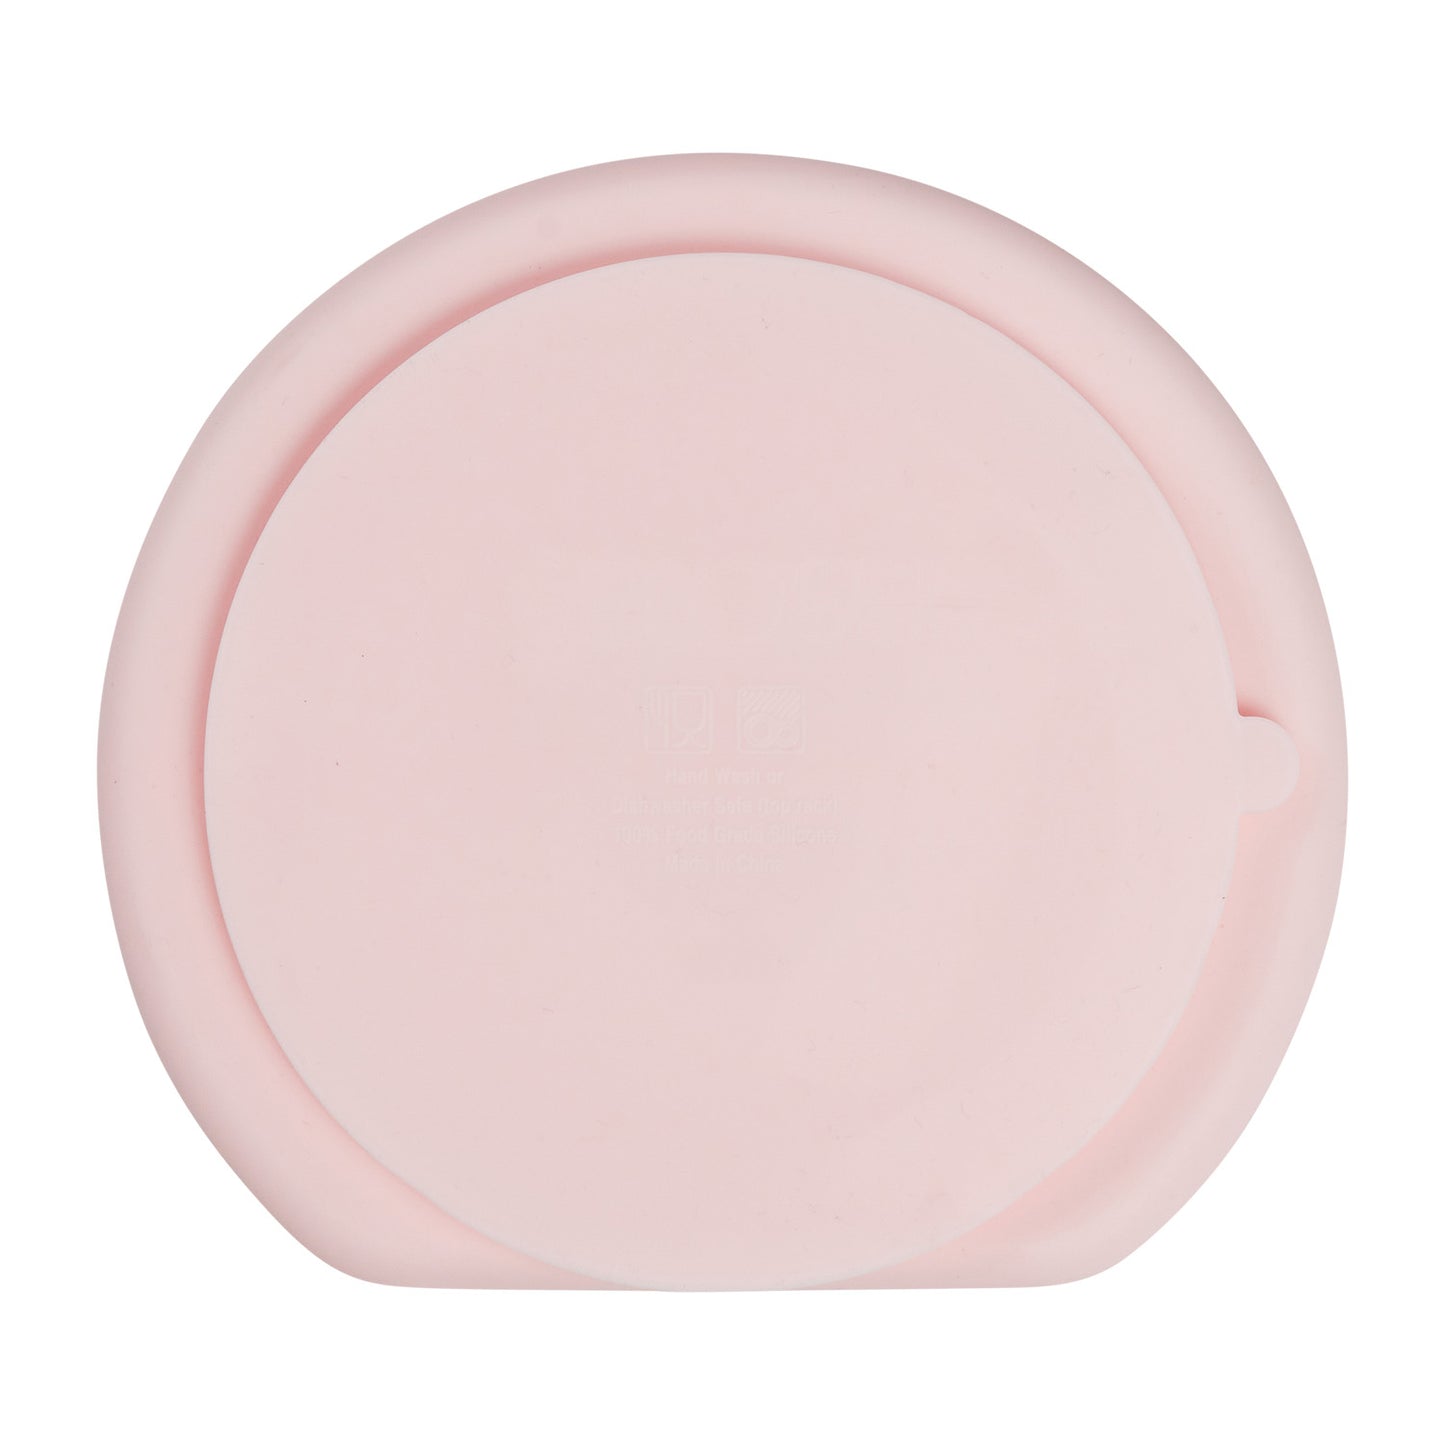 Splosh Baby Silicone Suction Plate - Pink